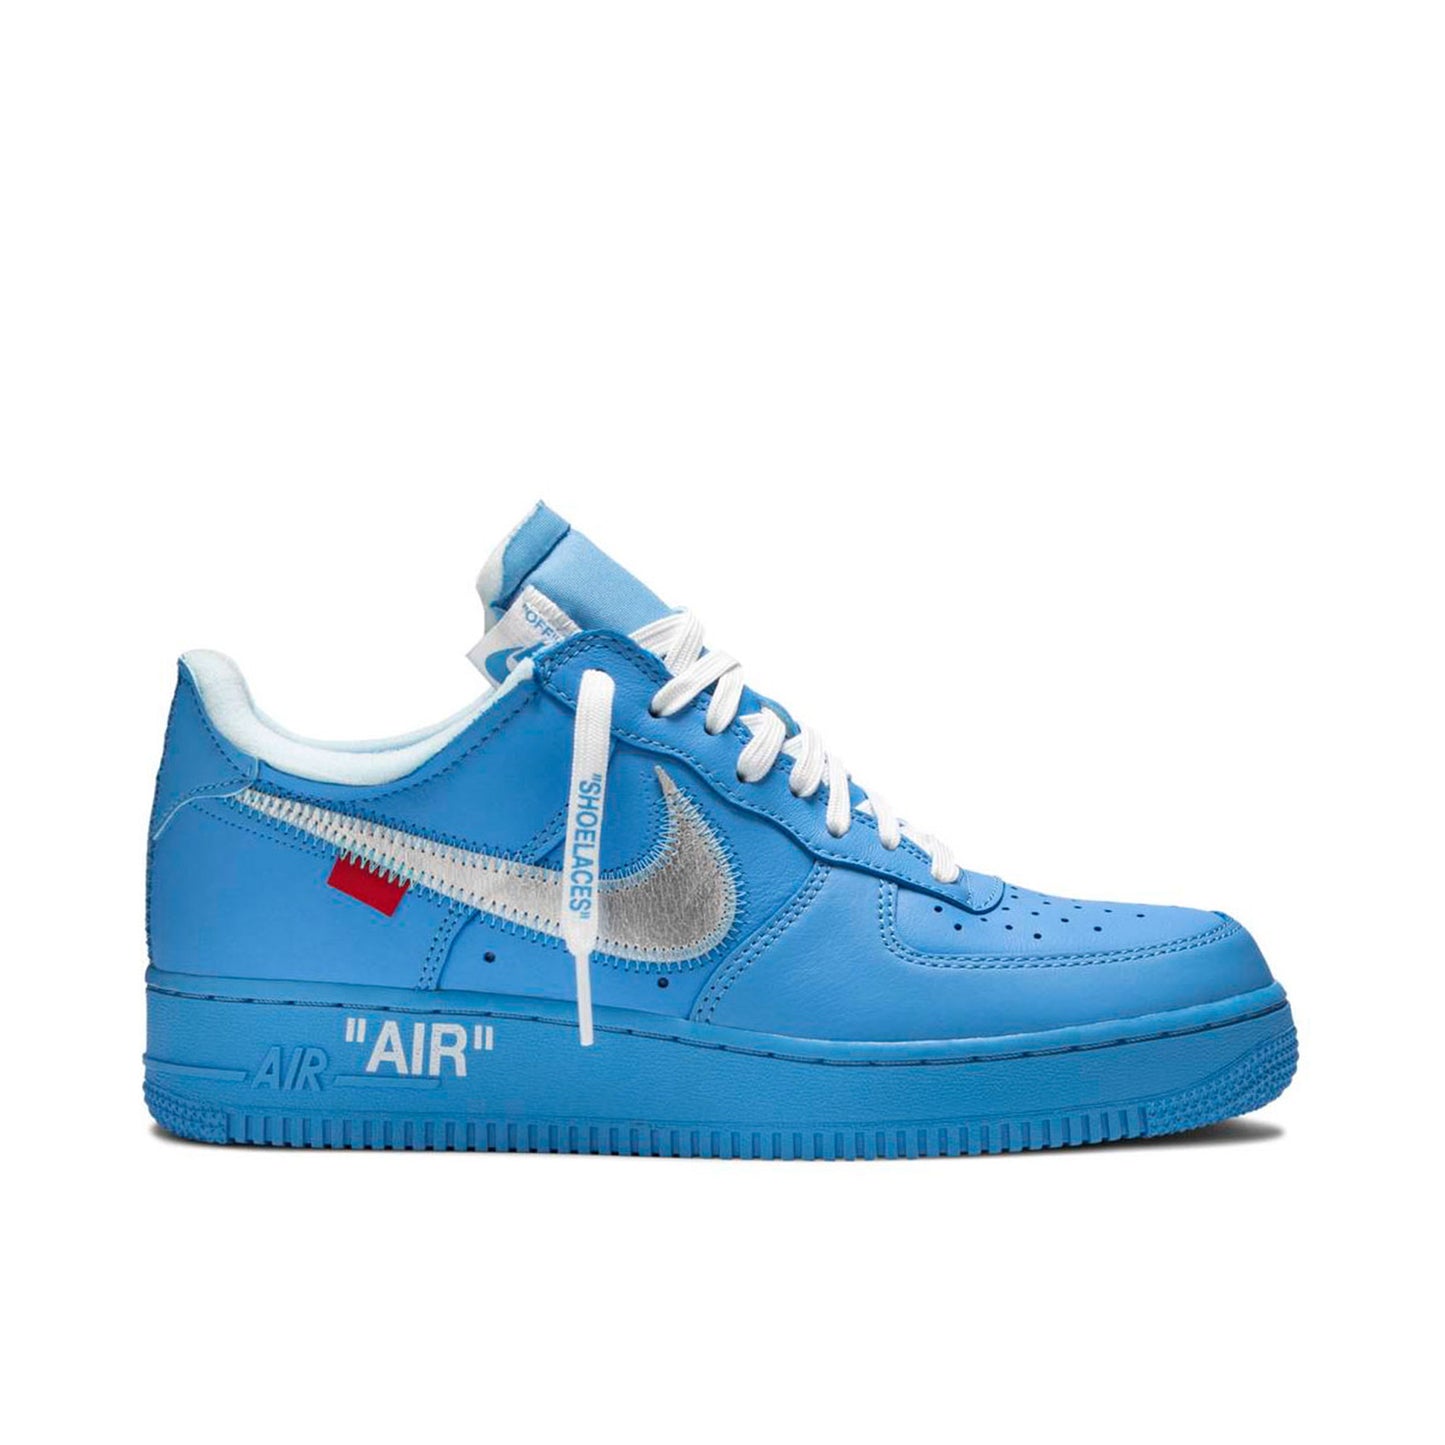 Nike x Off-White Air Force 1 Low "MCA" University Blue